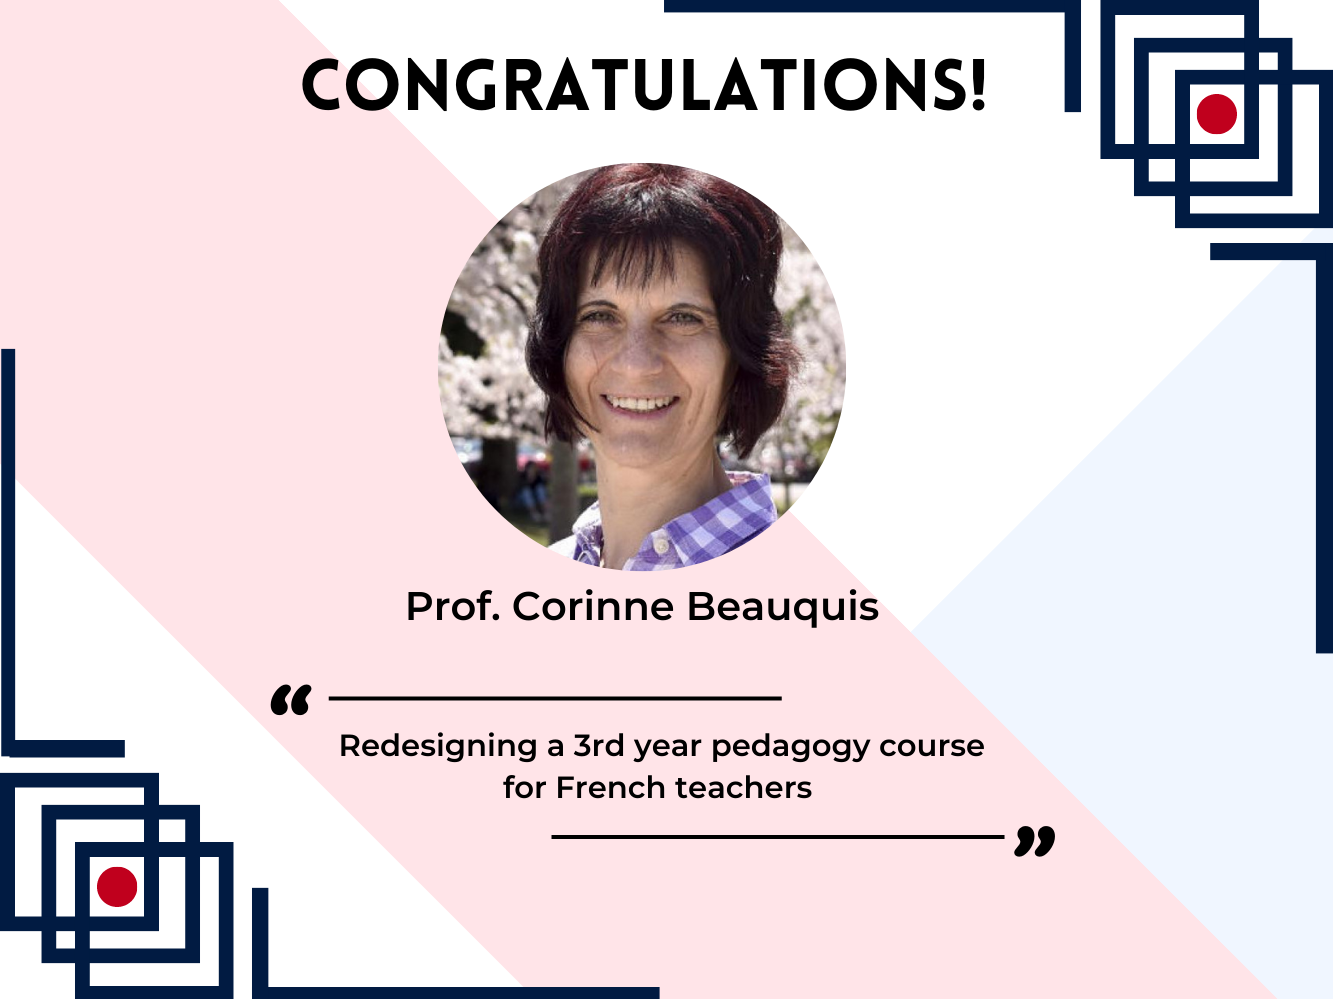 Prof. Corinne Beauquis: redesigning a 3rd year pedagogy course for French teachers